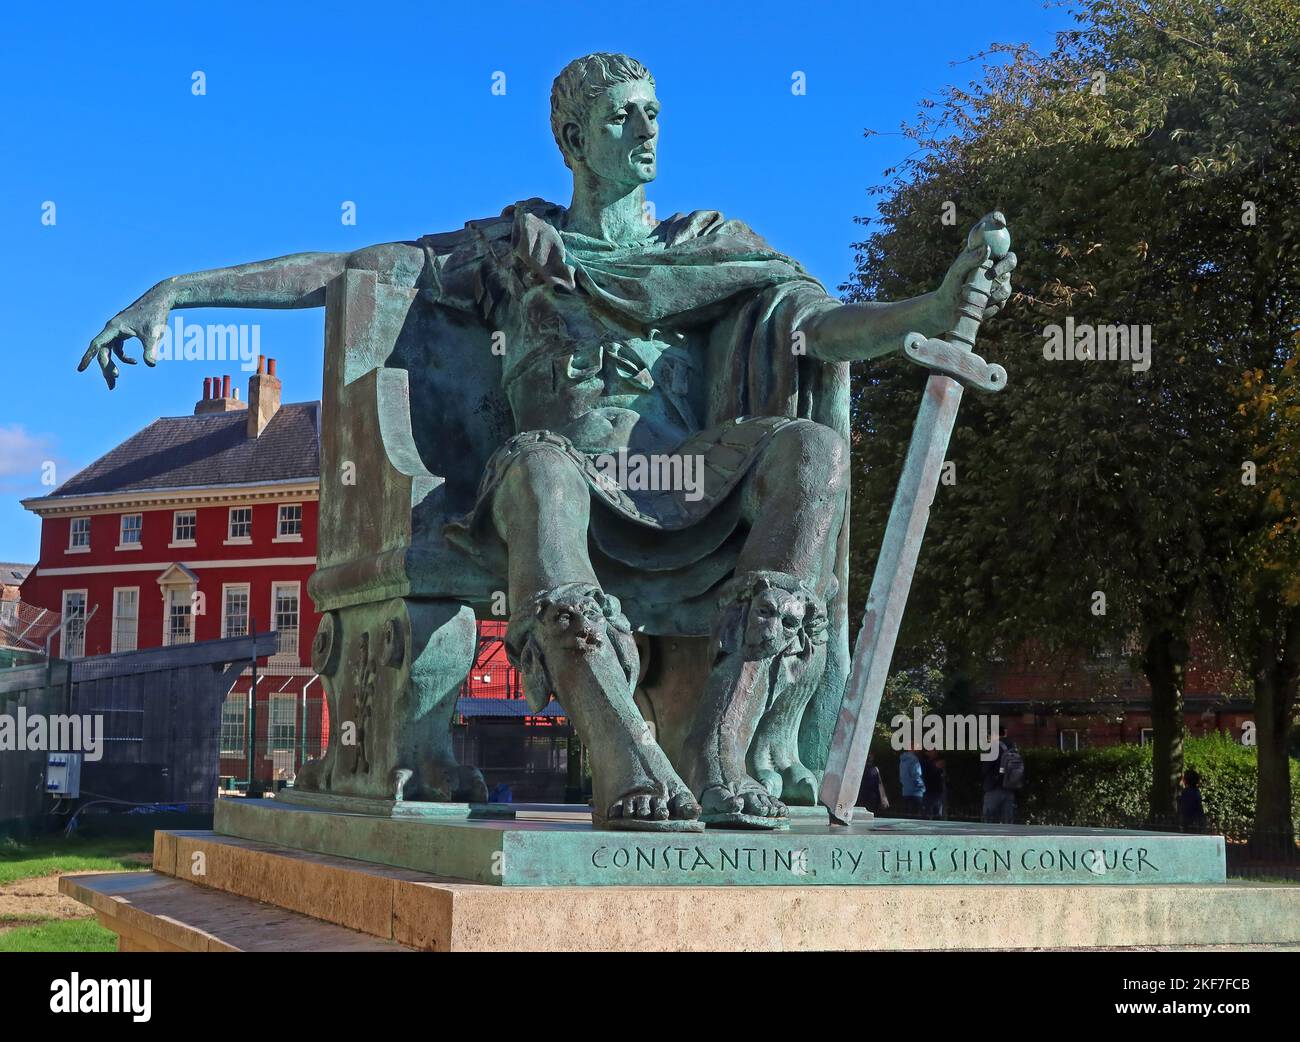 Statue of Constantine the Great, Roman emperor from AD 306 to 337, in York, in front of York Minster, Deangate, York, Yorkshire, England, UK,  YO1 7HH Stock Photo